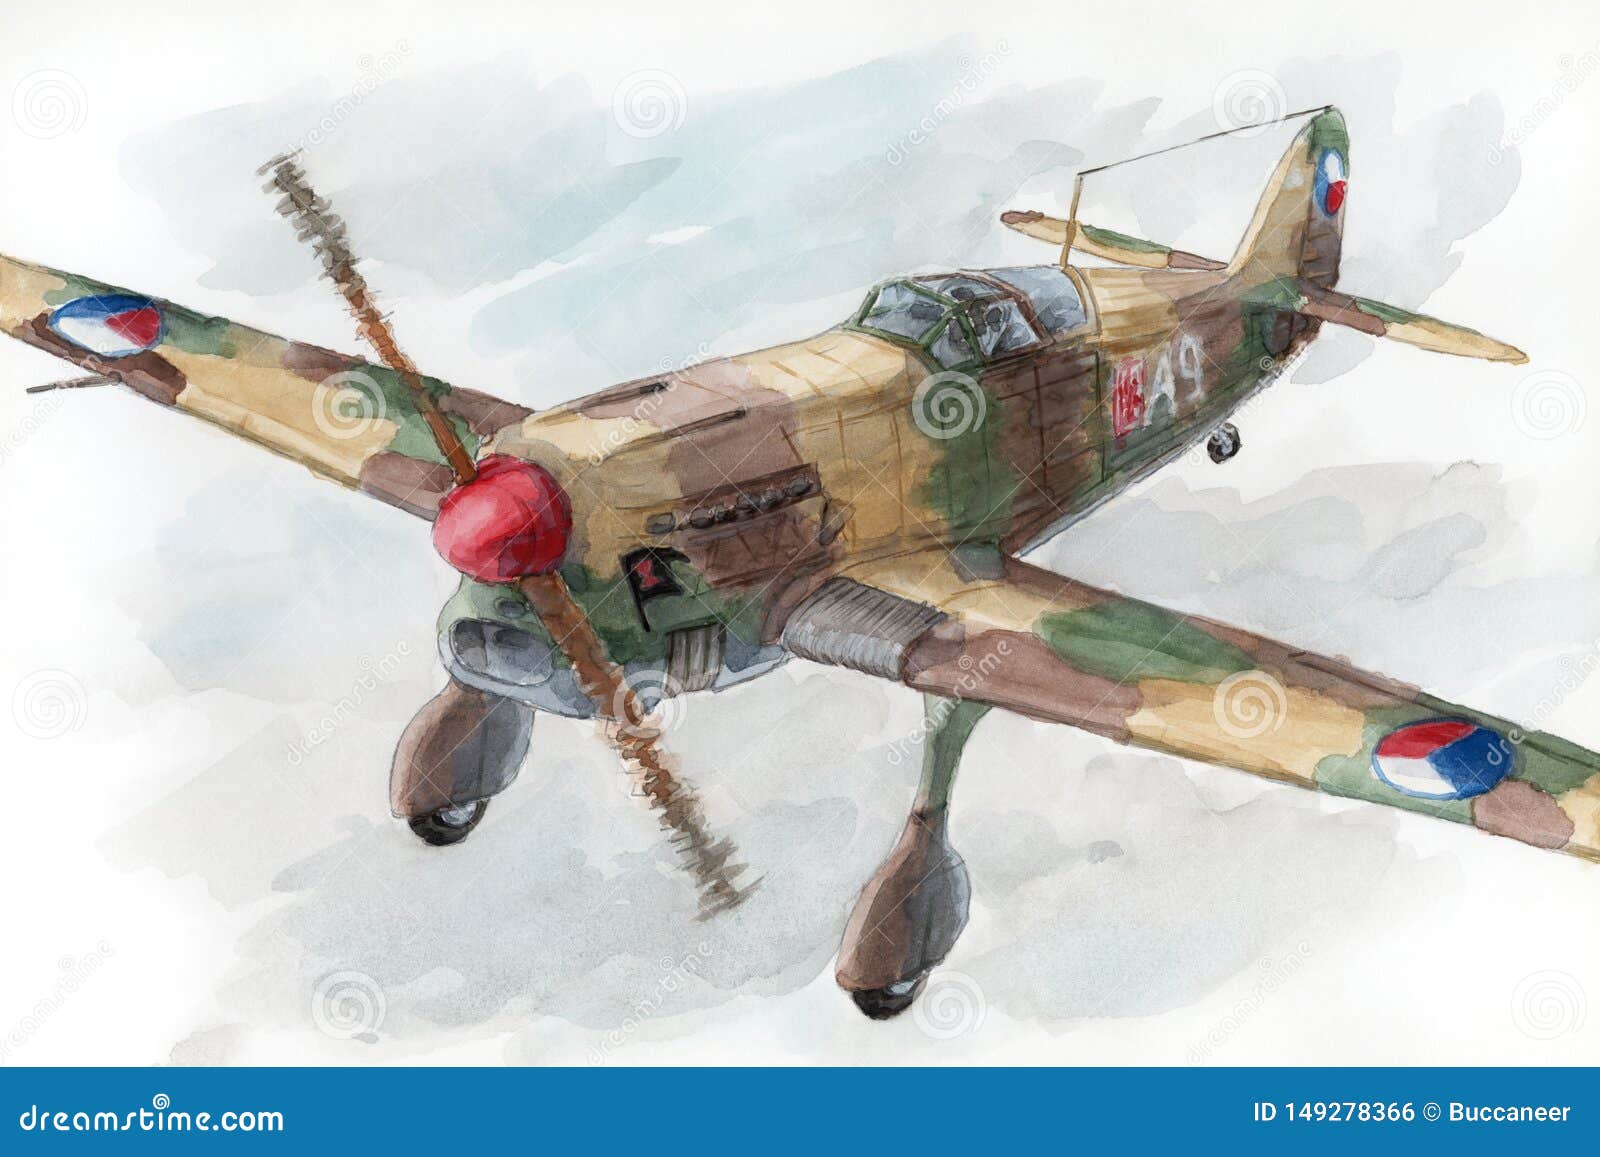 loose drawing of a czechoslovakian fighter avia b.35 second prototype in fly